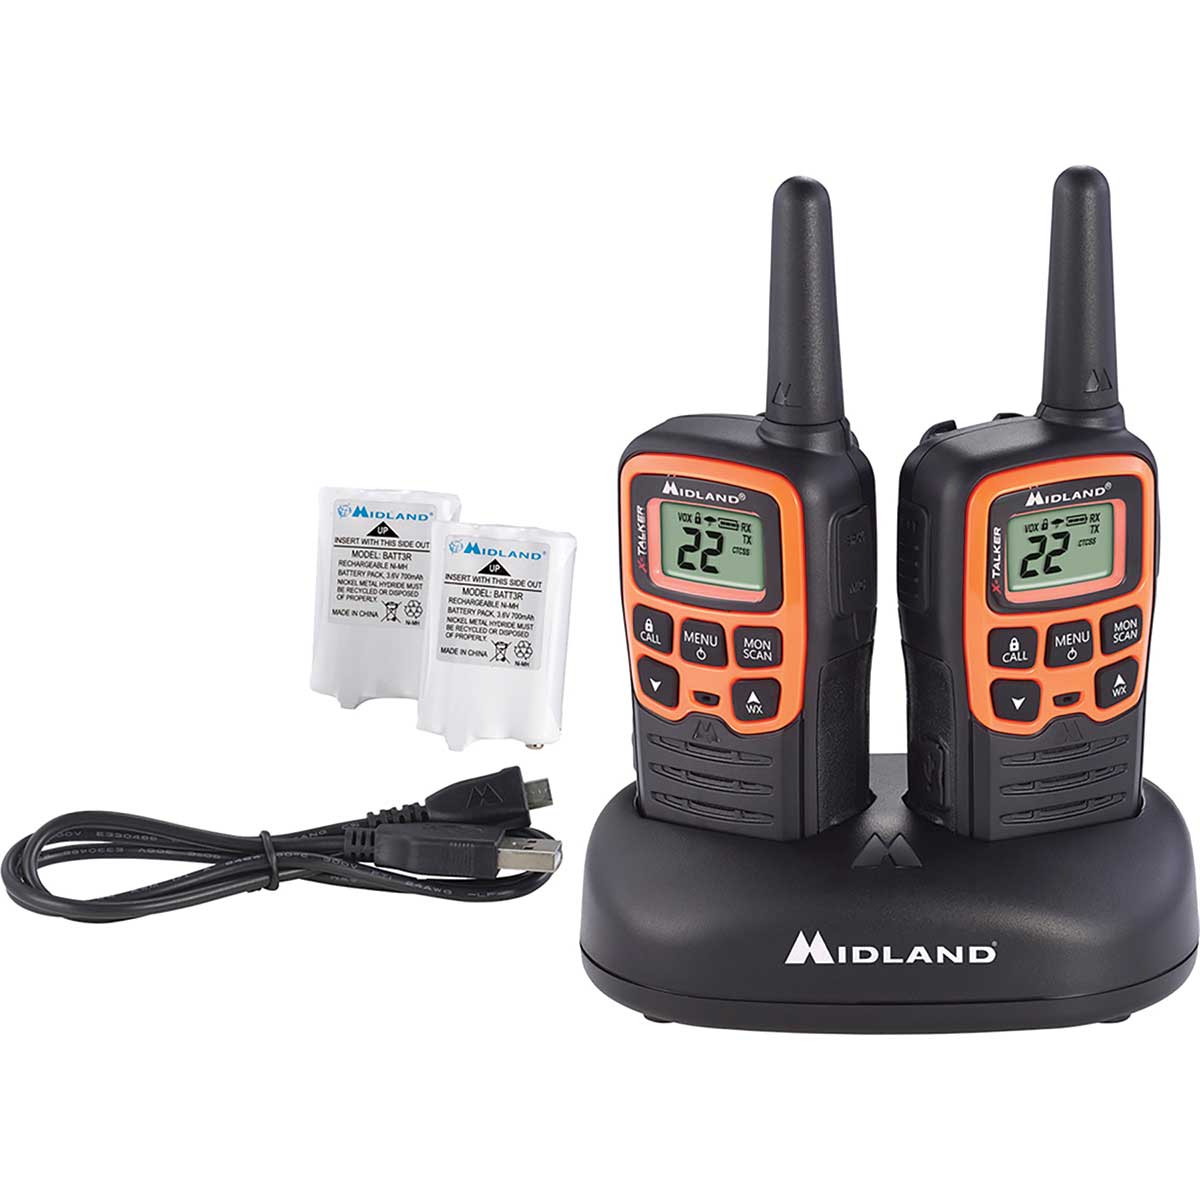 4-Pack Midland LXT500VP3 Two Way Radio, Rechargeable Batteries and Chargers - 2